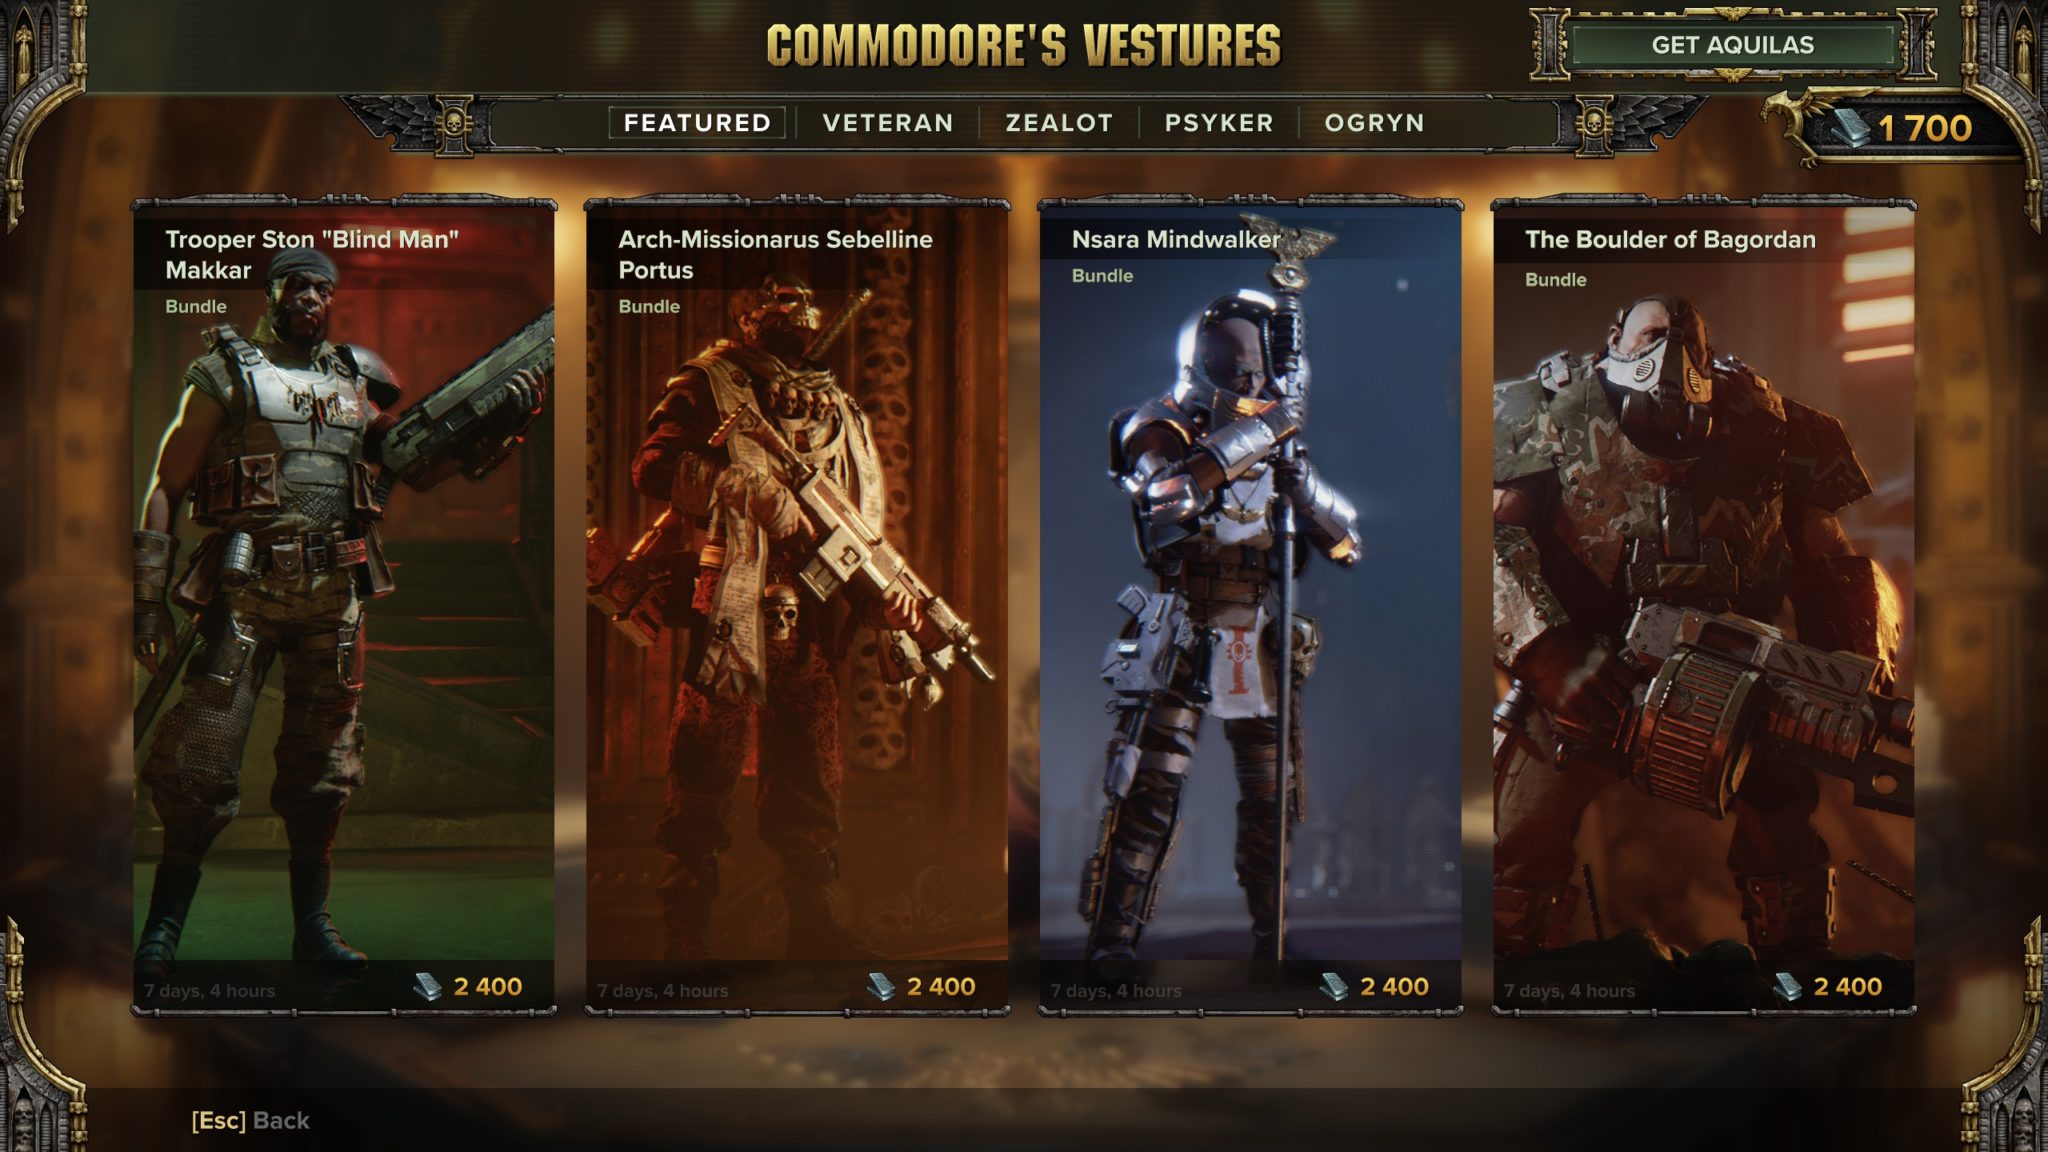 How to raise Trust Level and unlock cosmetics in Warhammer 40K